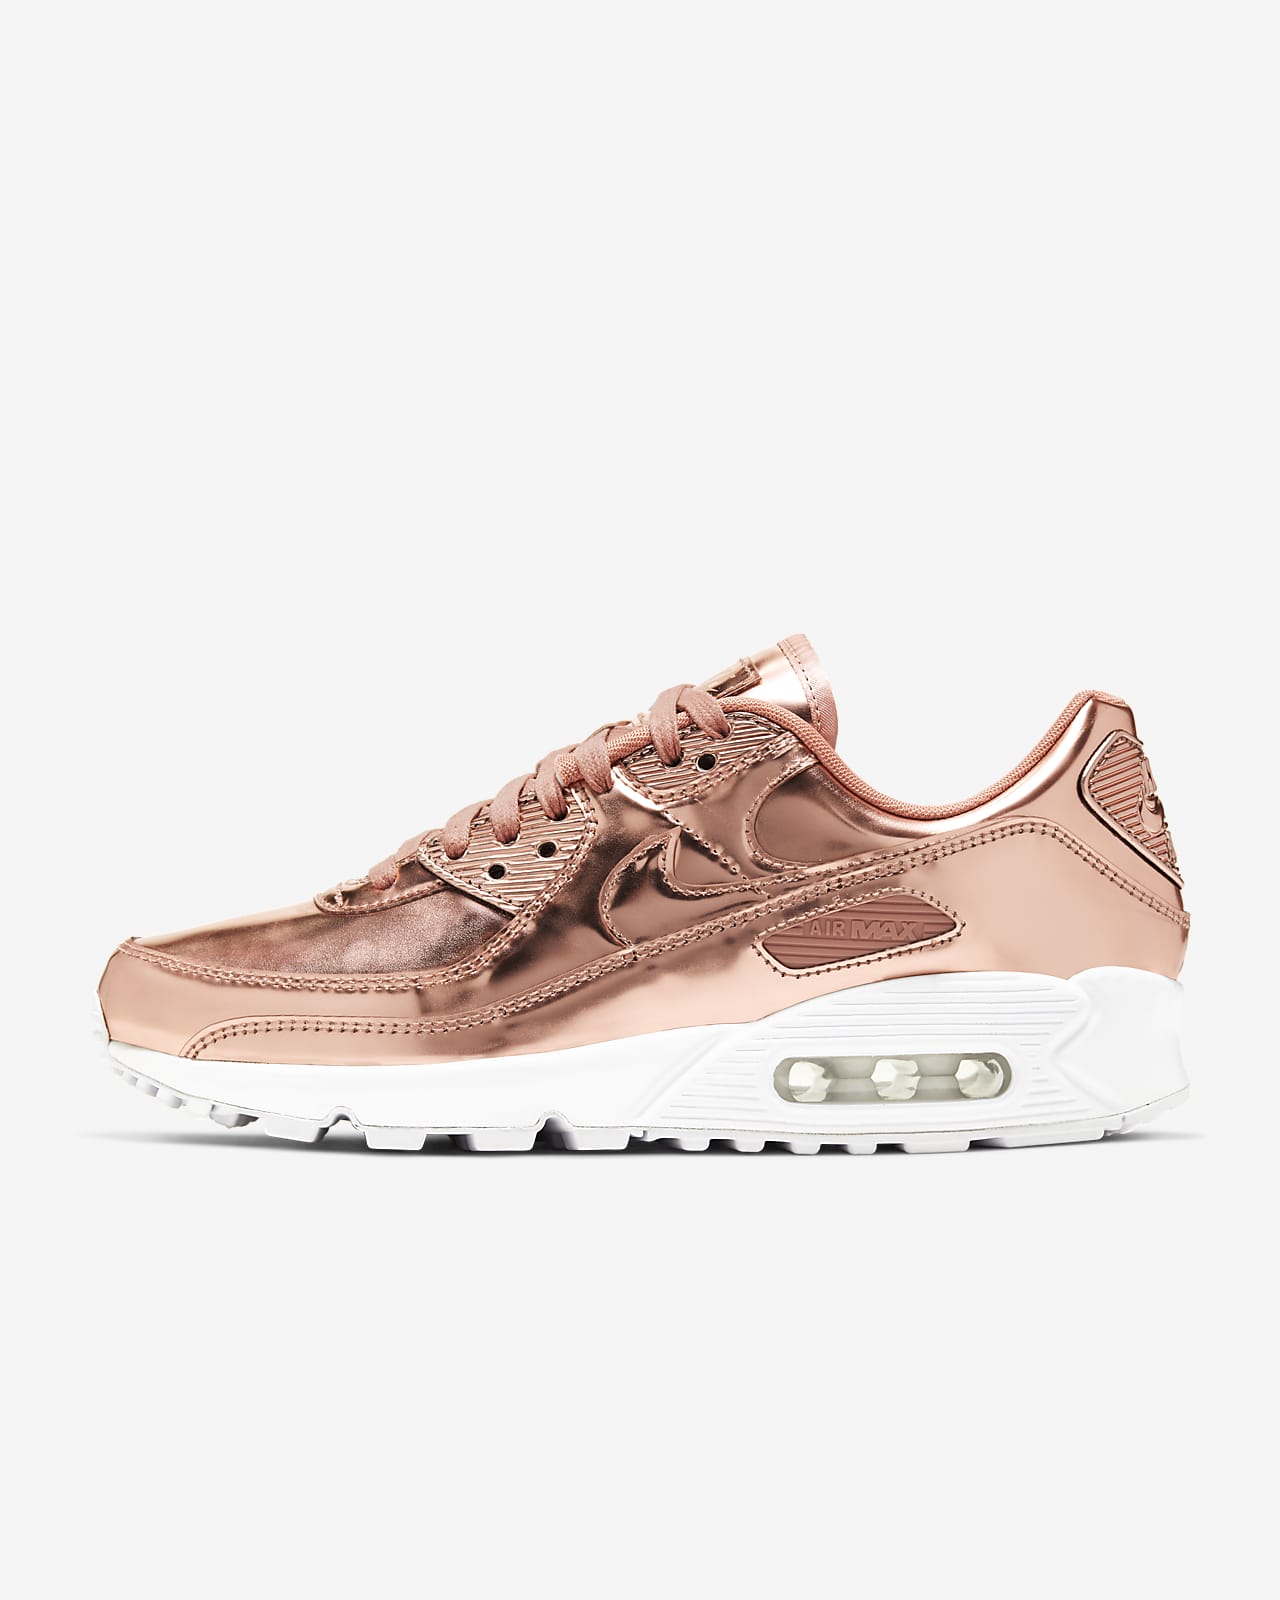 nike air max rose gold and white